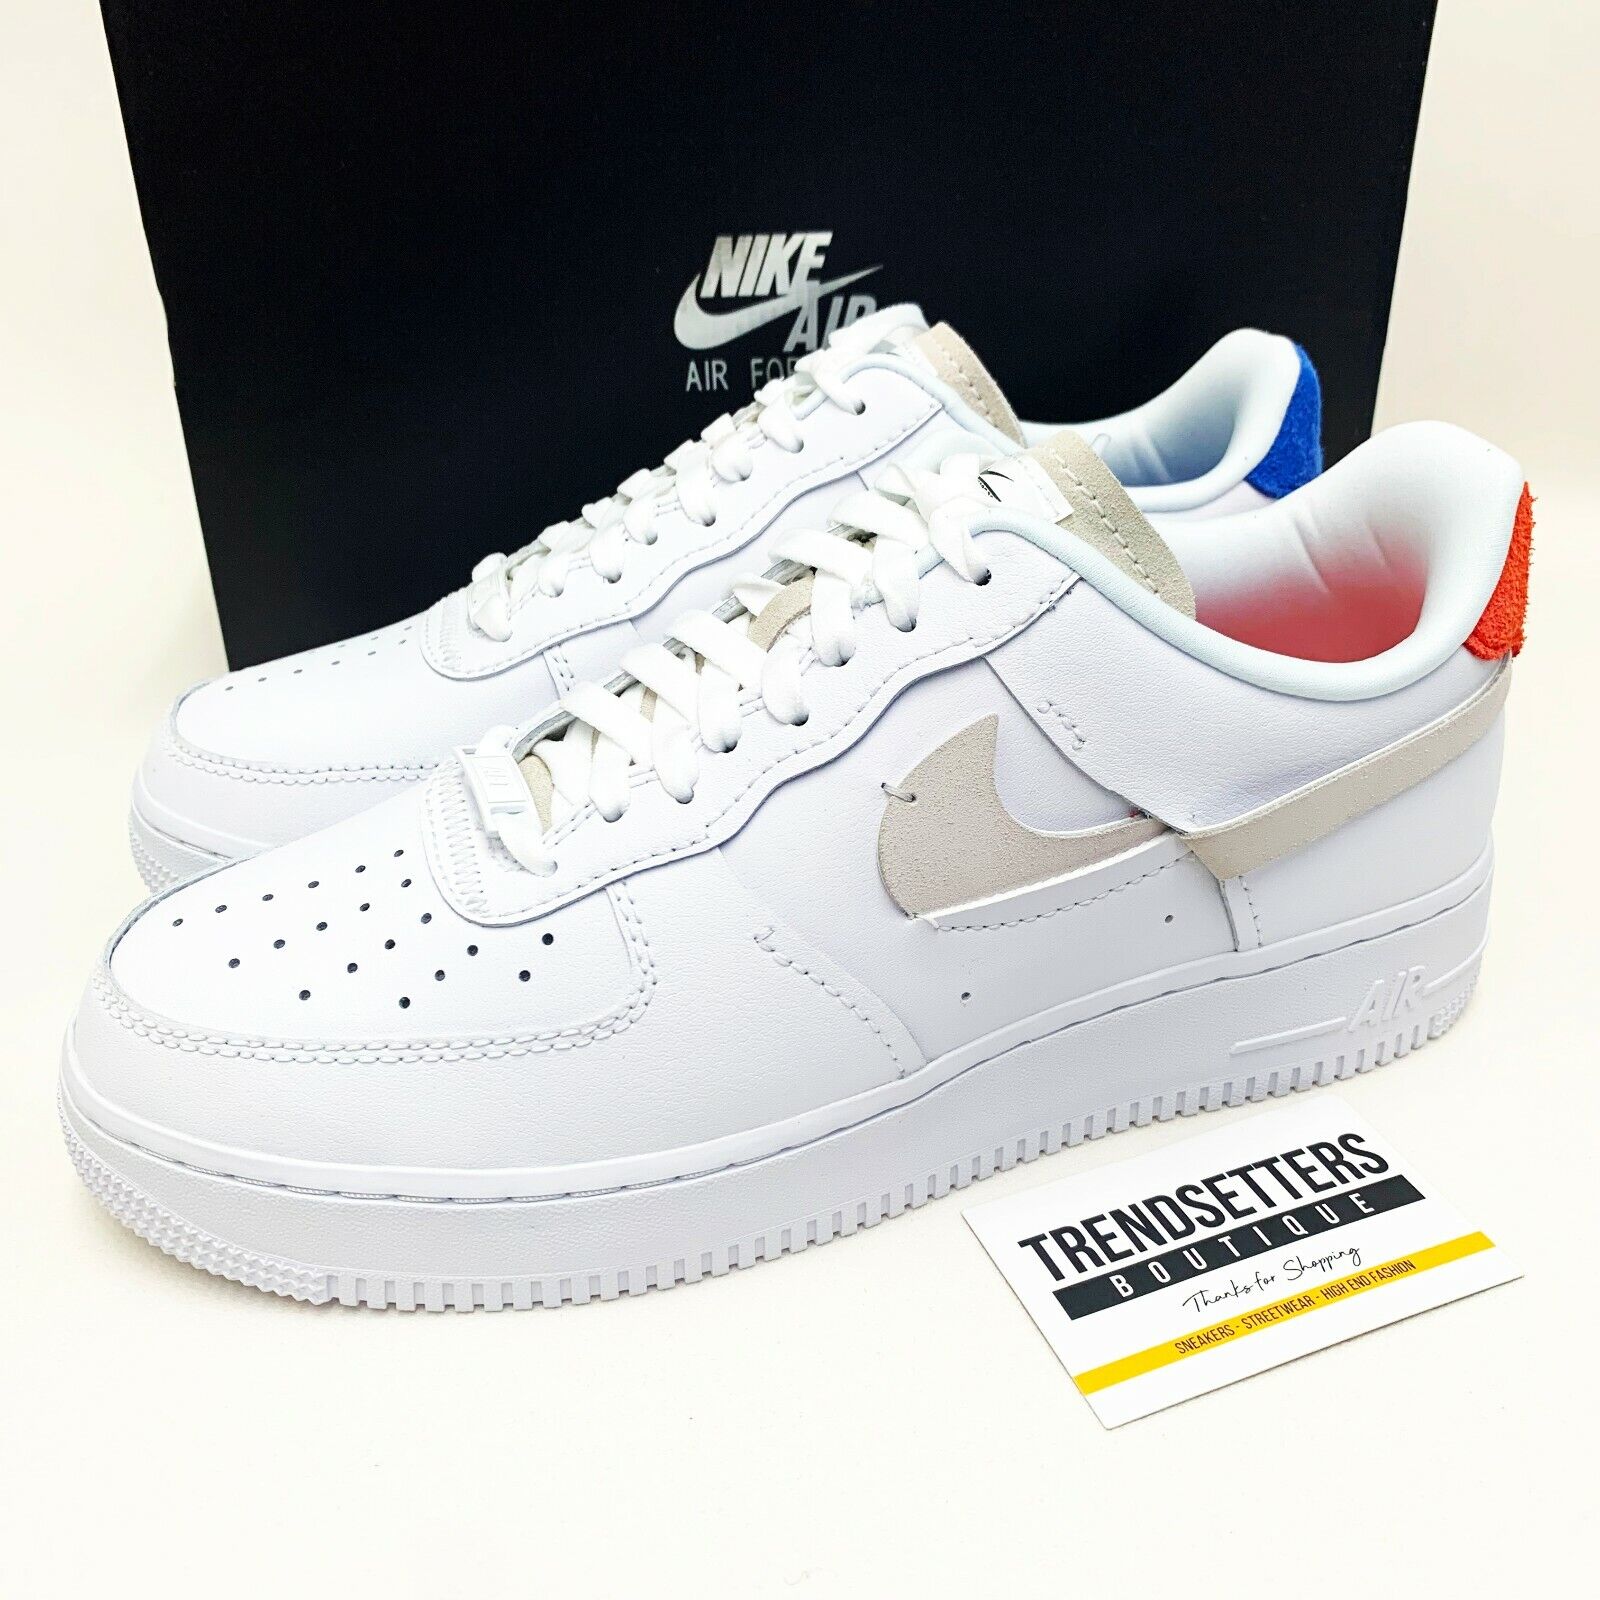 NIKE AIR FORCE 1 ONE LOW LX UK US 4 5 6 